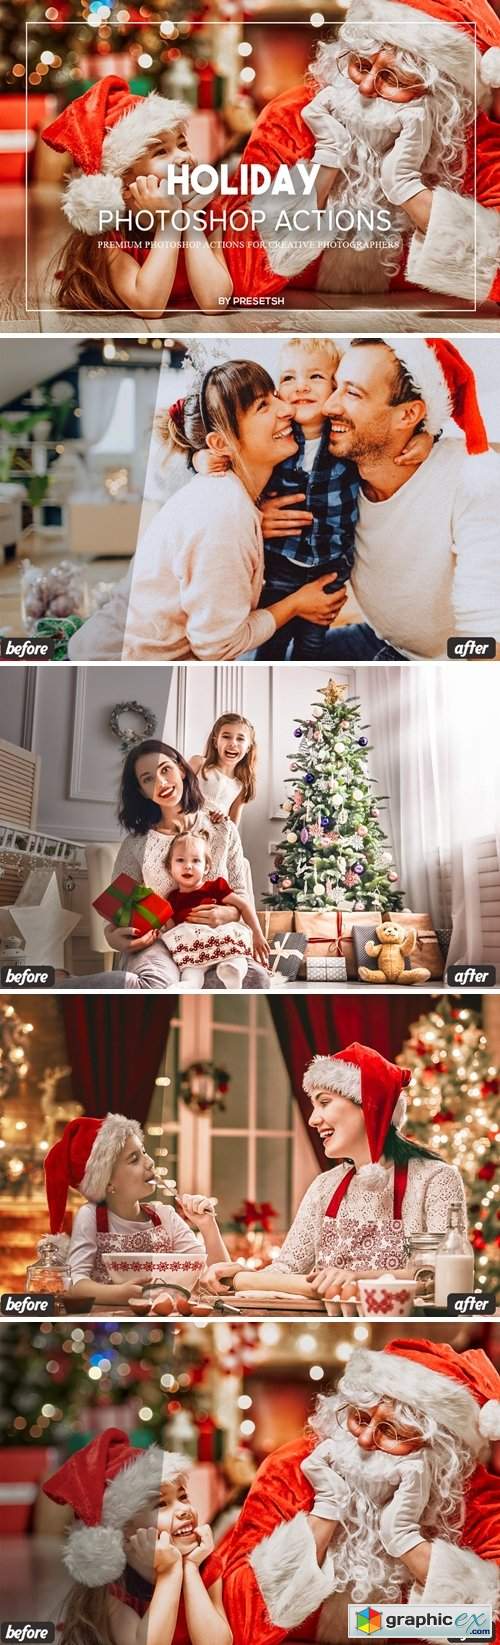  Holiday Photoshop Actions 